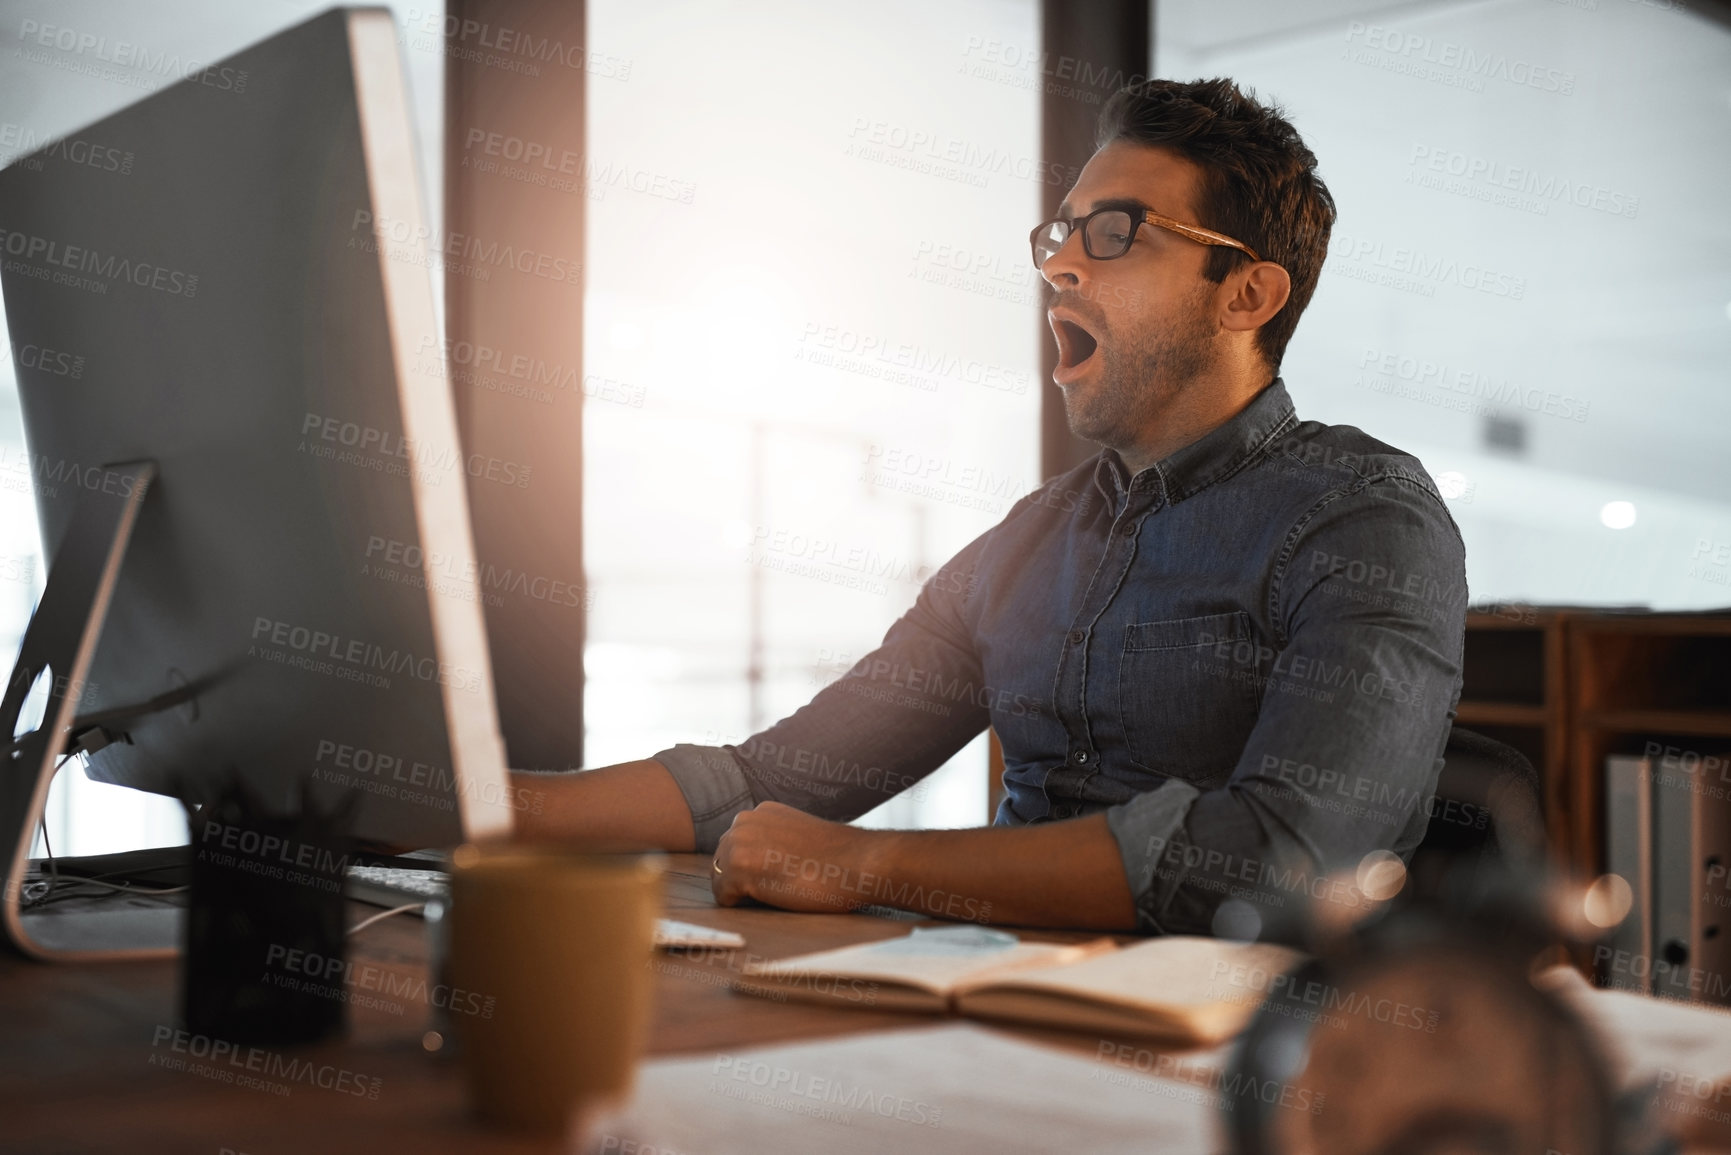 Buy stock photo Shot of a young businessman yawning while working late on a computer in an office